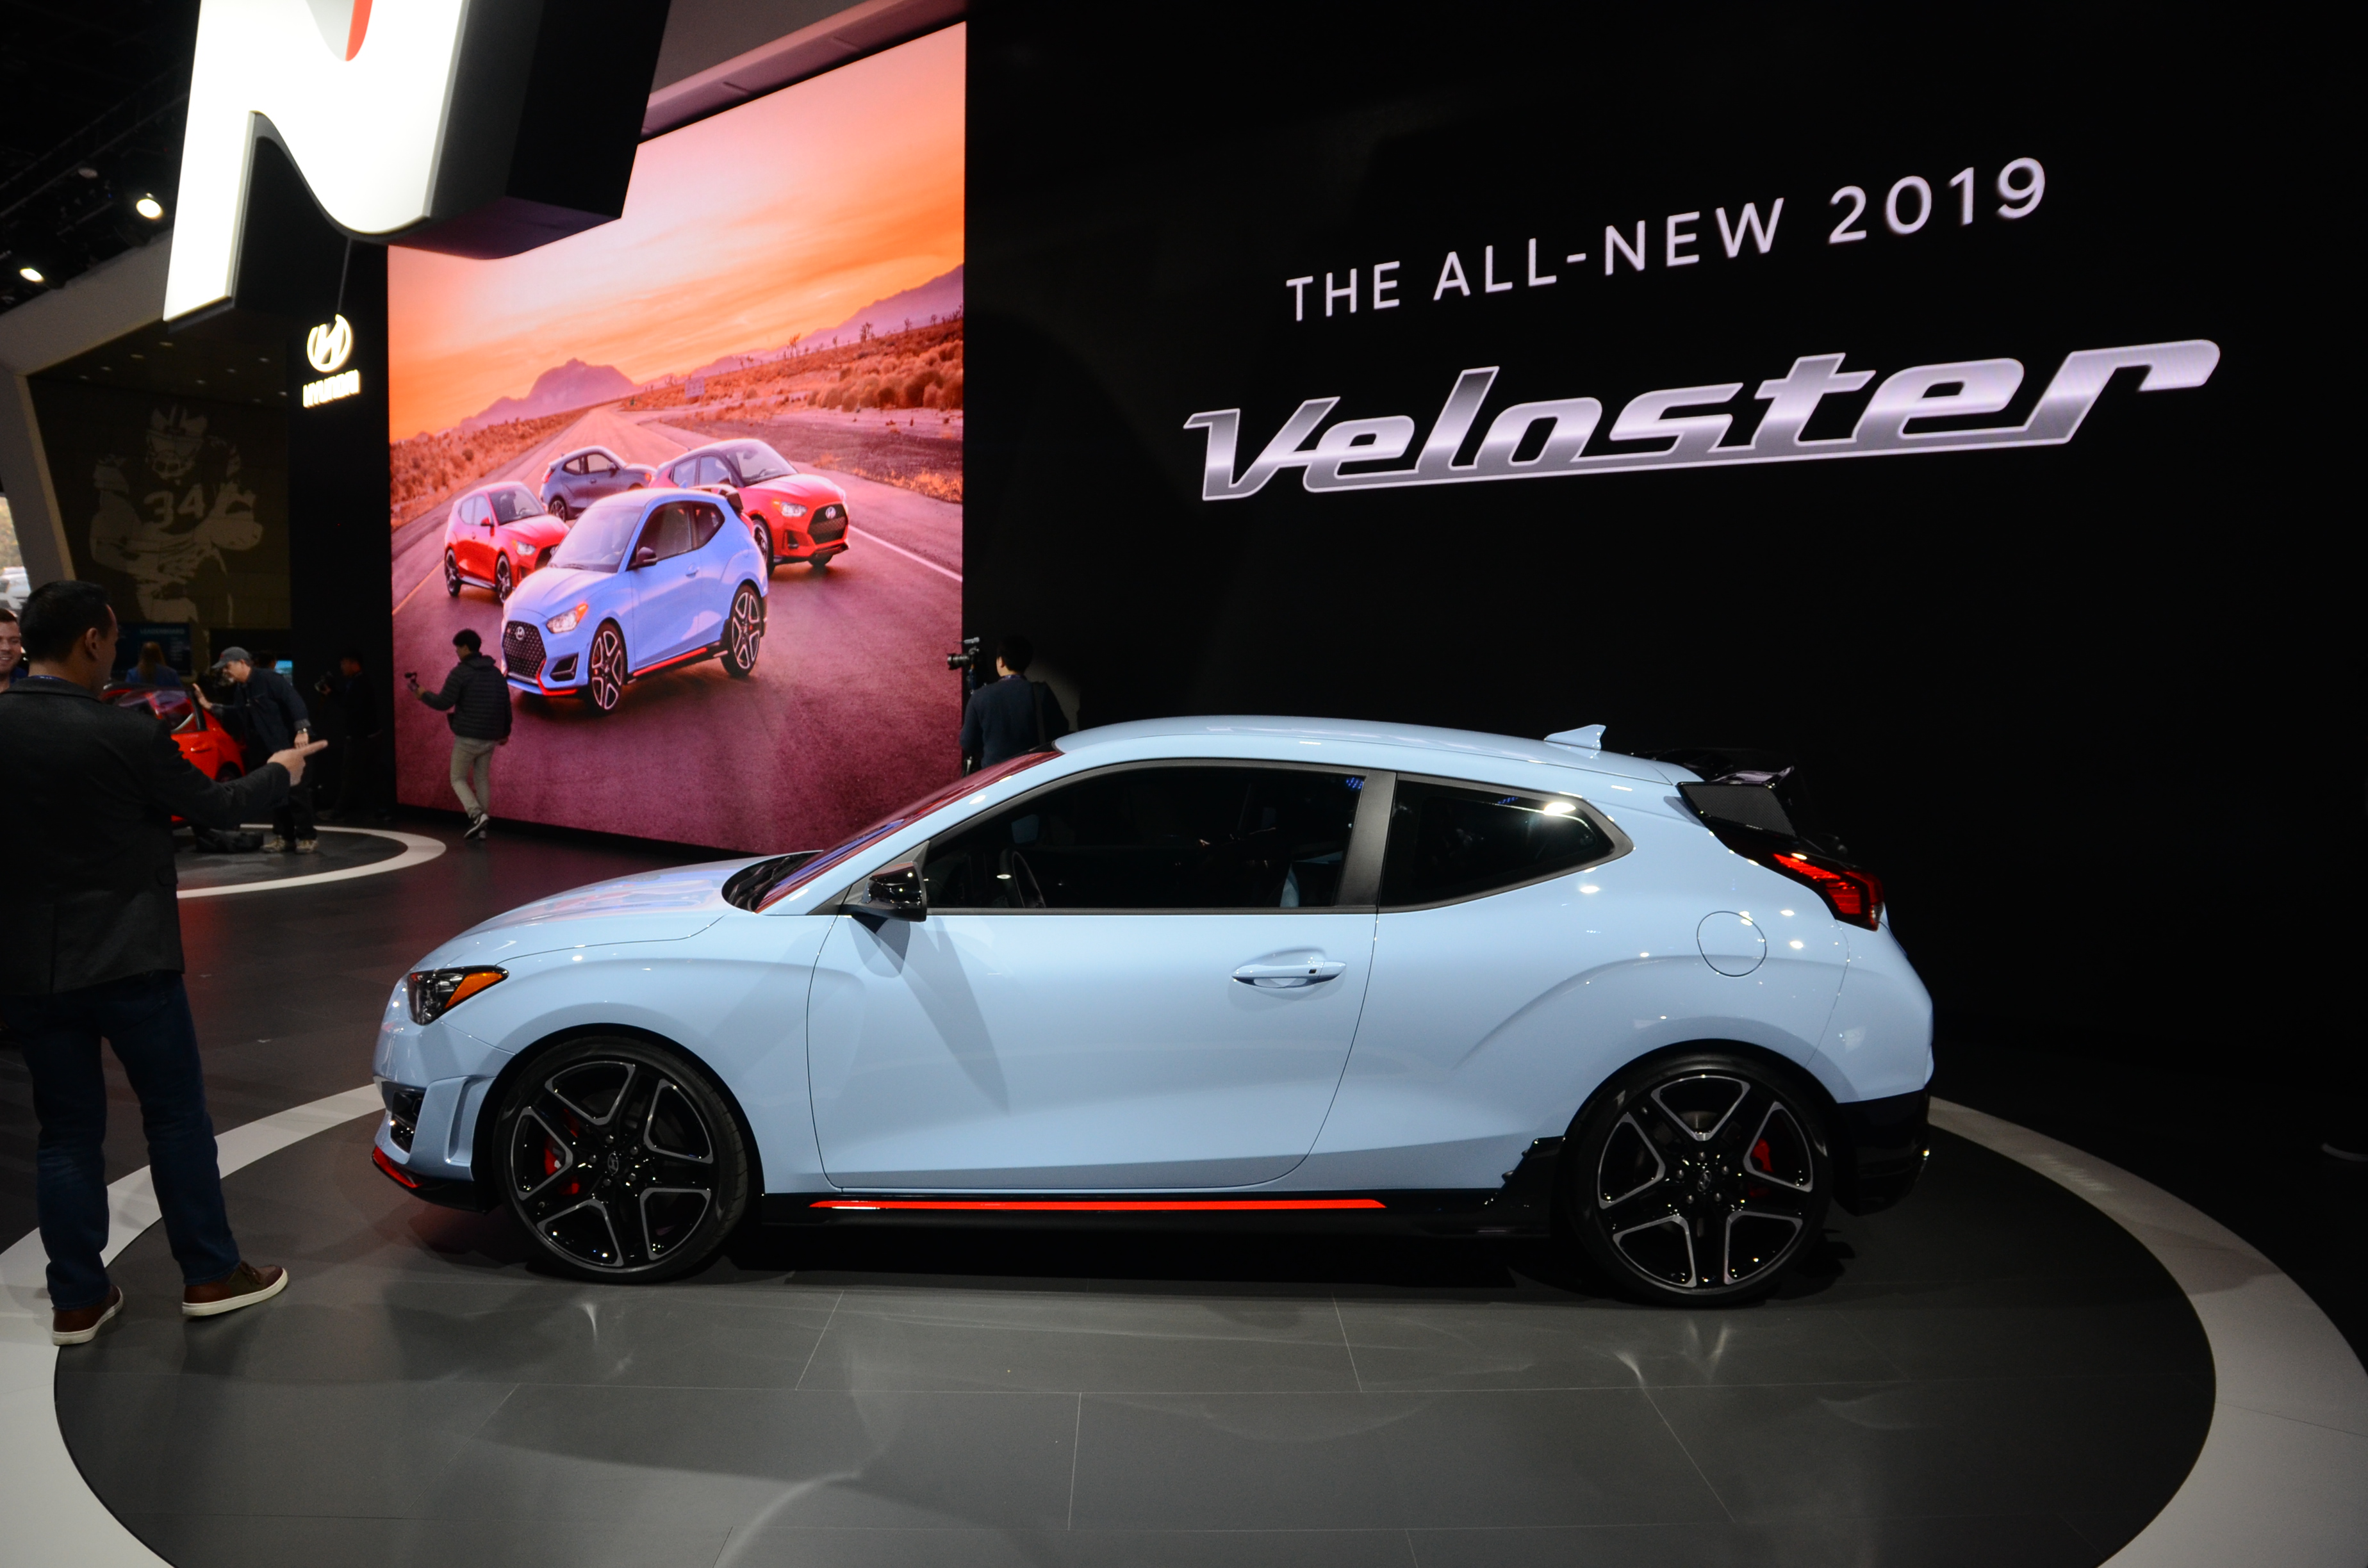 Hyundai Veloster N mod specifications